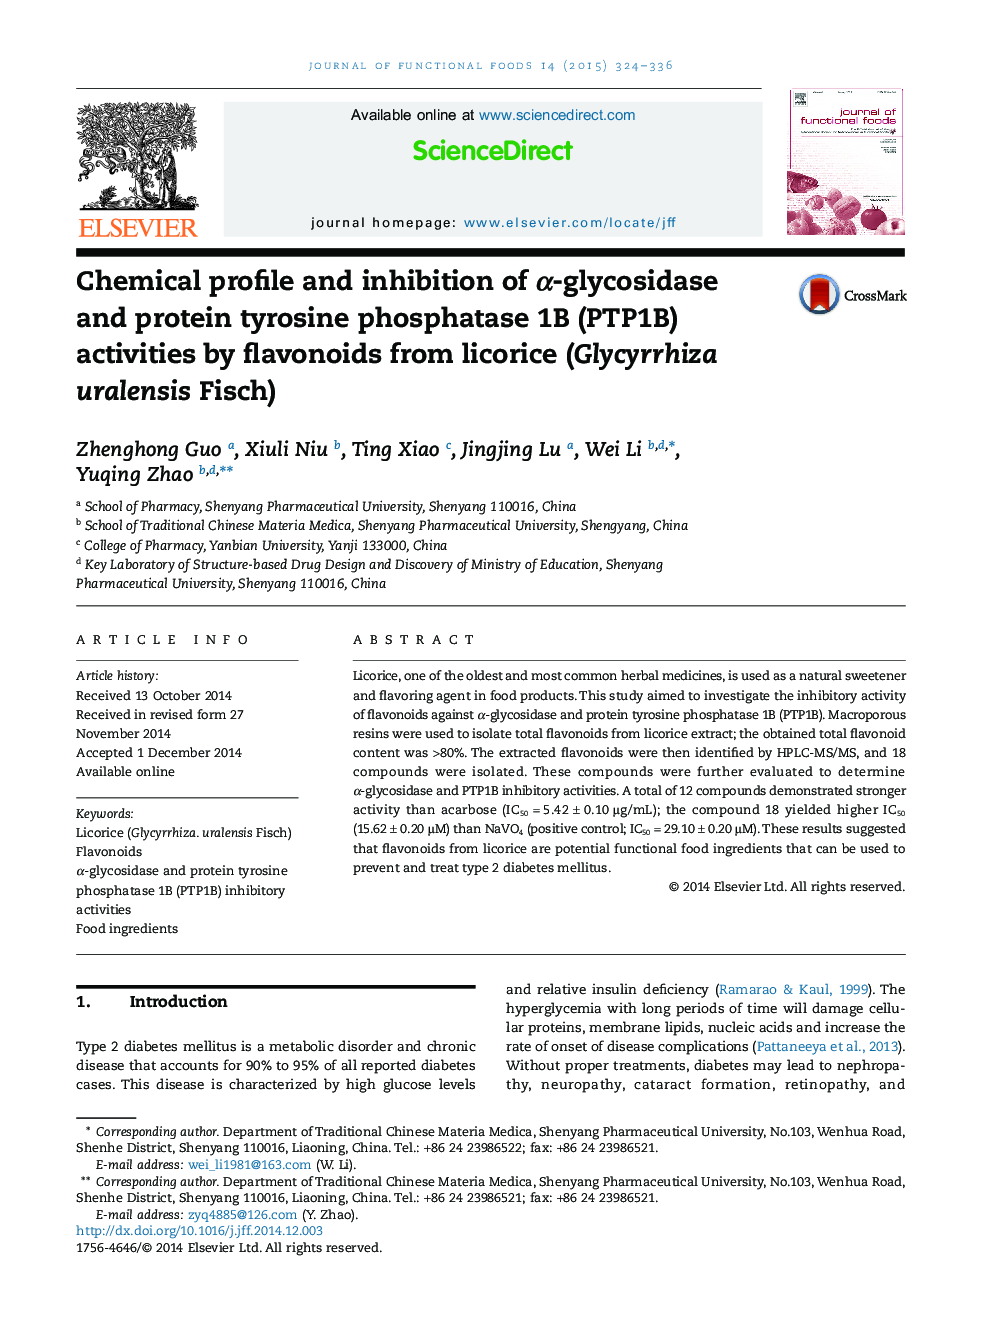 Chemical profile and inhibition of Î±-glycosidase and protein tyrosine phosphatase 1B (PTP1B) activities by flavonoids from licorice (Glycyrrhiza uralensis Fisch)